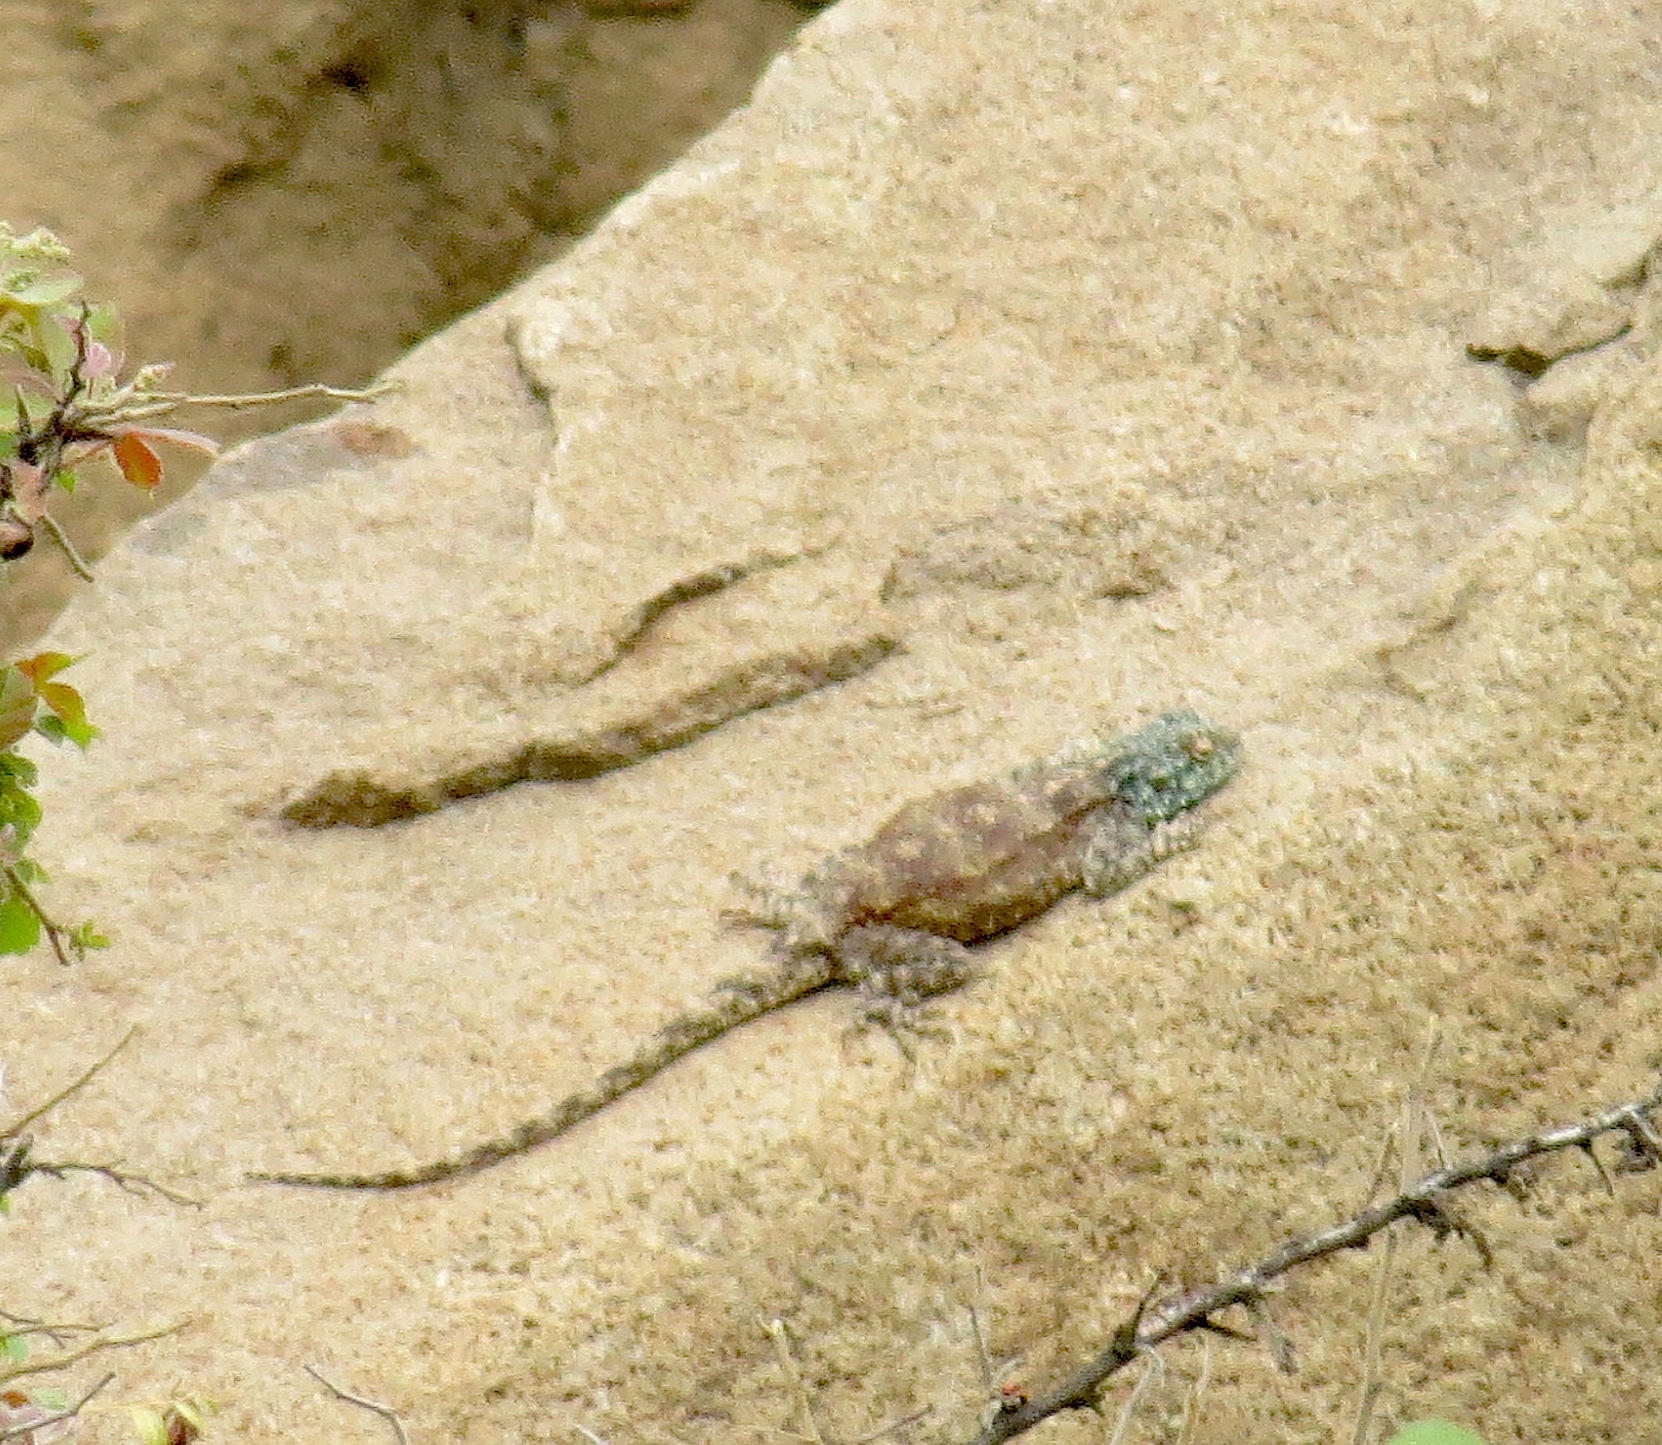 southern-rock-agama